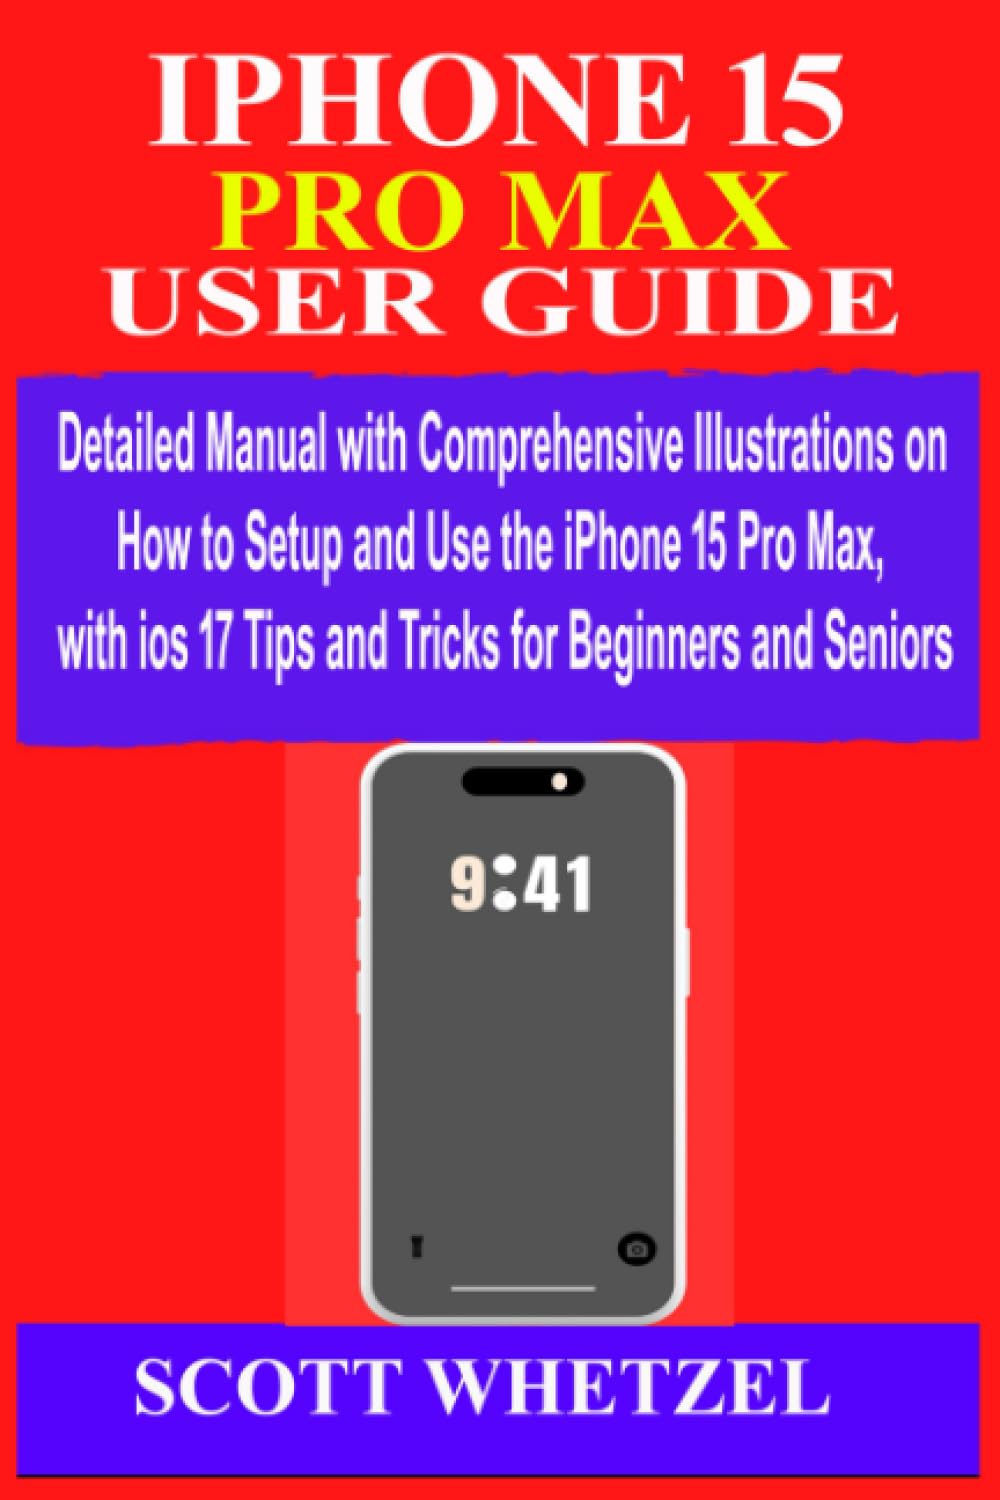 IPHONE 15 PRO MAX USER GUIDE: Detailed Manual with Comprehensive Illustrations on How to Setup and Use the iPhone 15 Pro Max, with ios 17 Tips and Tricks for Beginners and Seniors